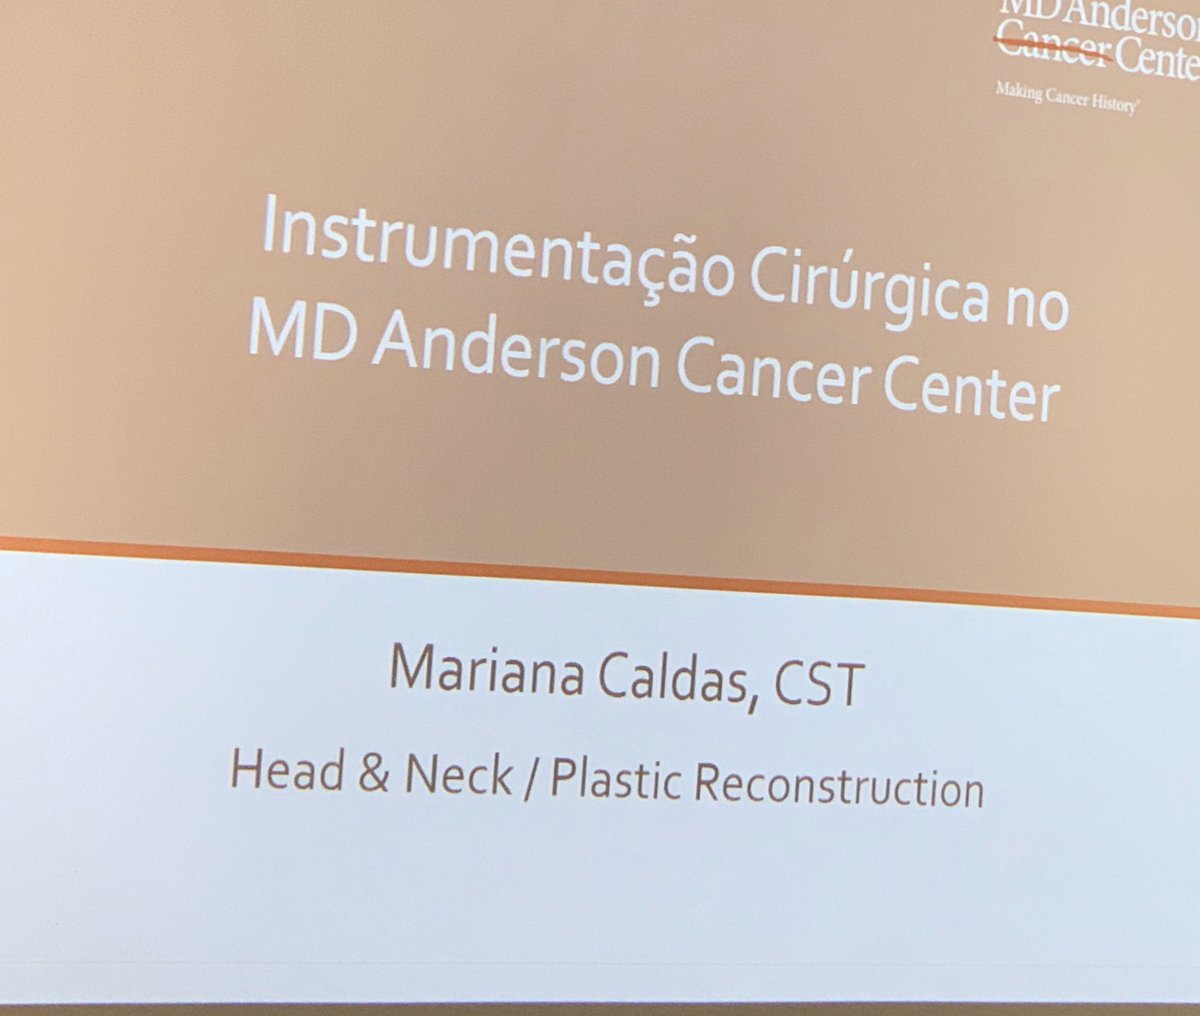 Our PeriOp team is known globally for excellence! Mariana Caldas presenting via Skype to conference in Brazil highlighting our best practices - timeouts, debriefs, and measures to keep our #oncsurgery patients safe @MDAndersonNews.